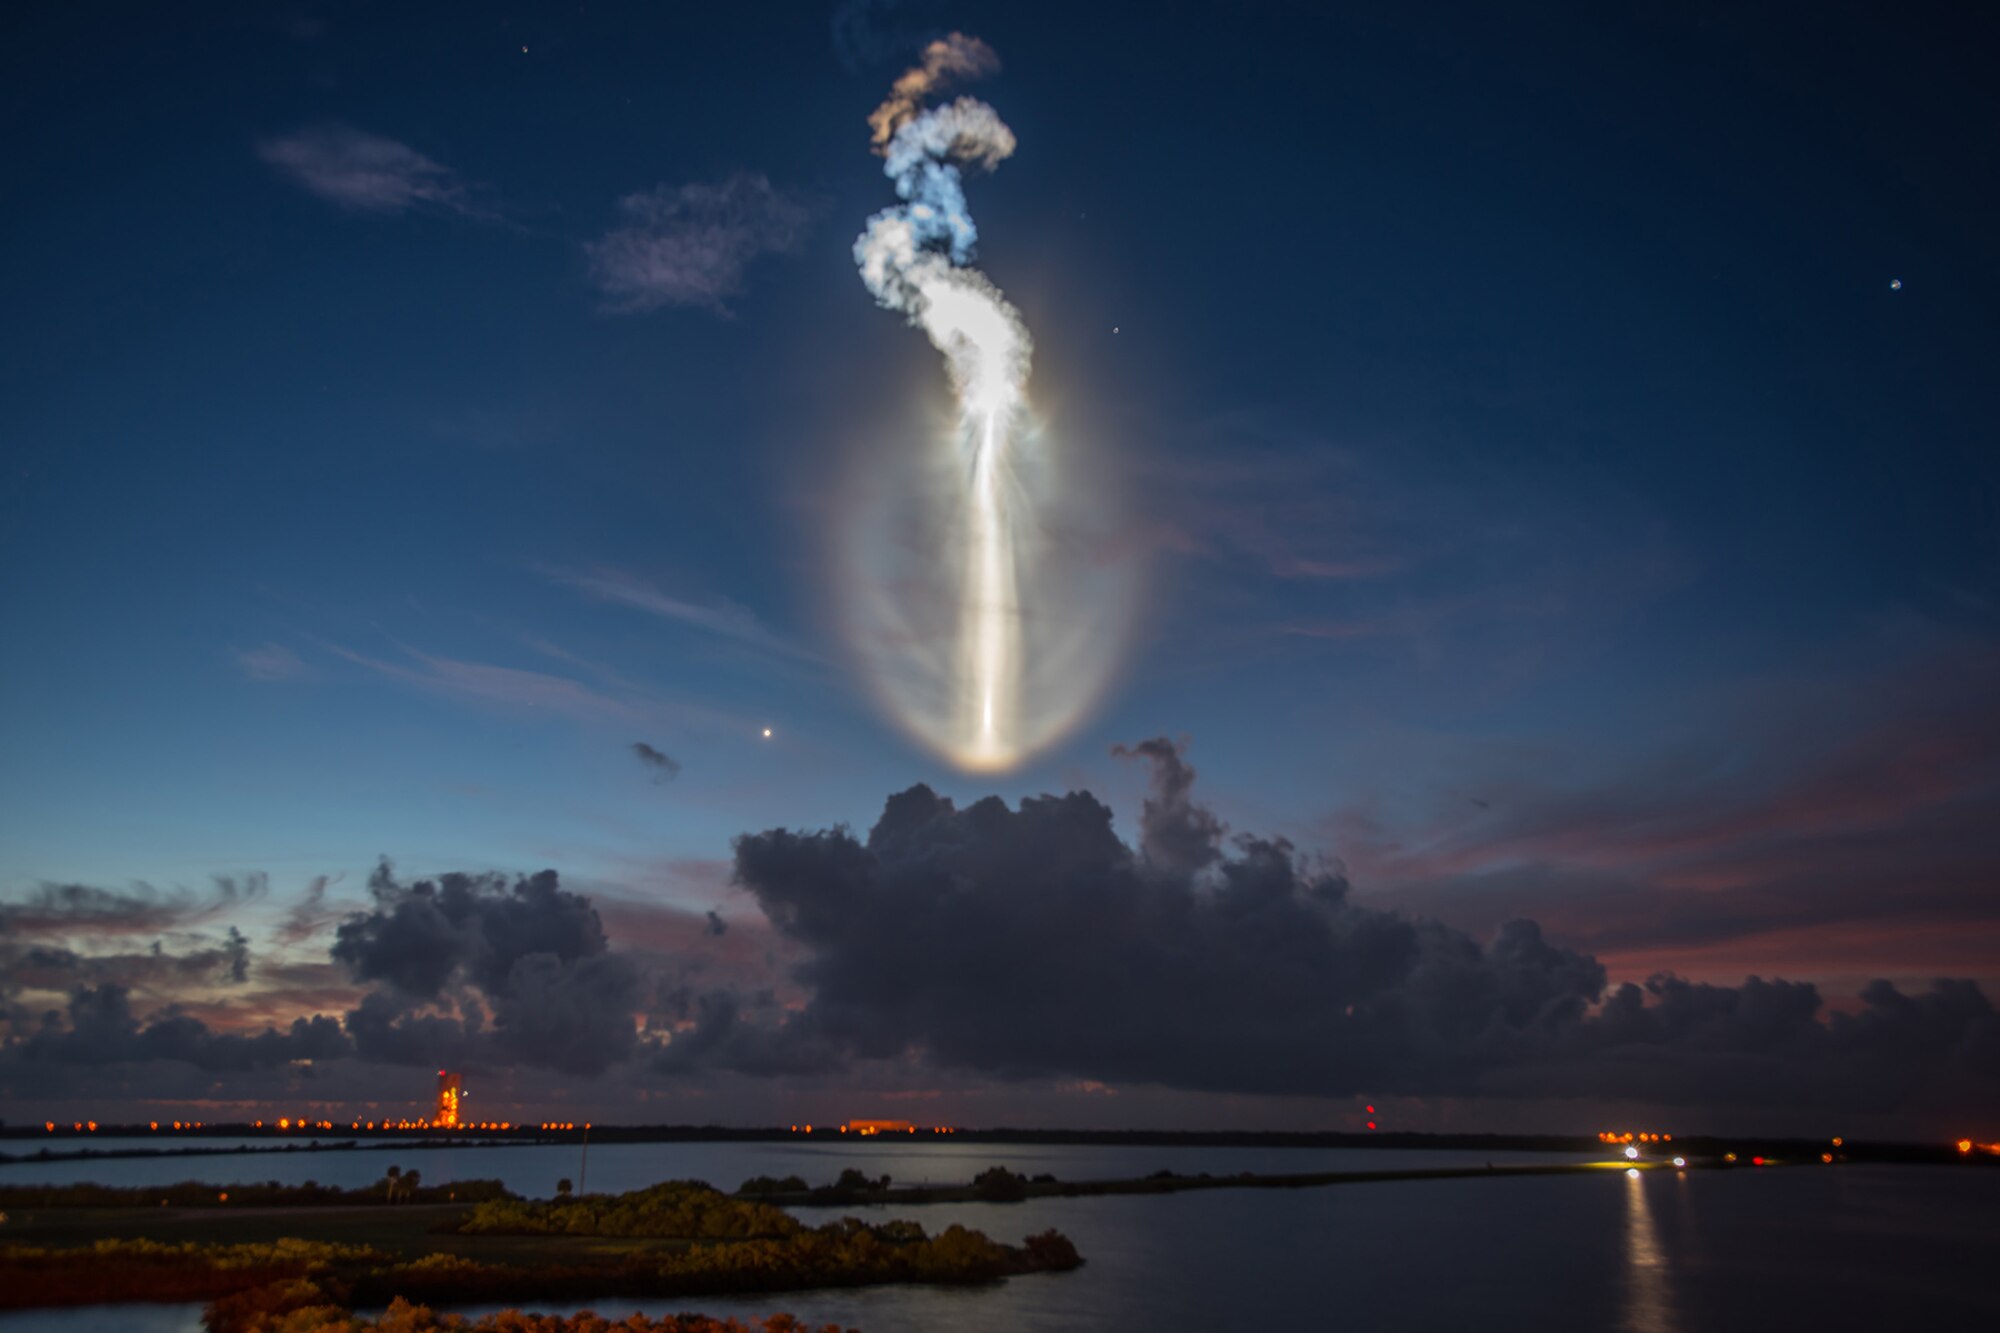 An Atlas V rocket carrying the MUOS-4 satellite  lifts off from Cape Canaveral AFS' Space Launch Complex 41 at 6:18 a.m., Sept 2. (Photo courtesy of ULA)